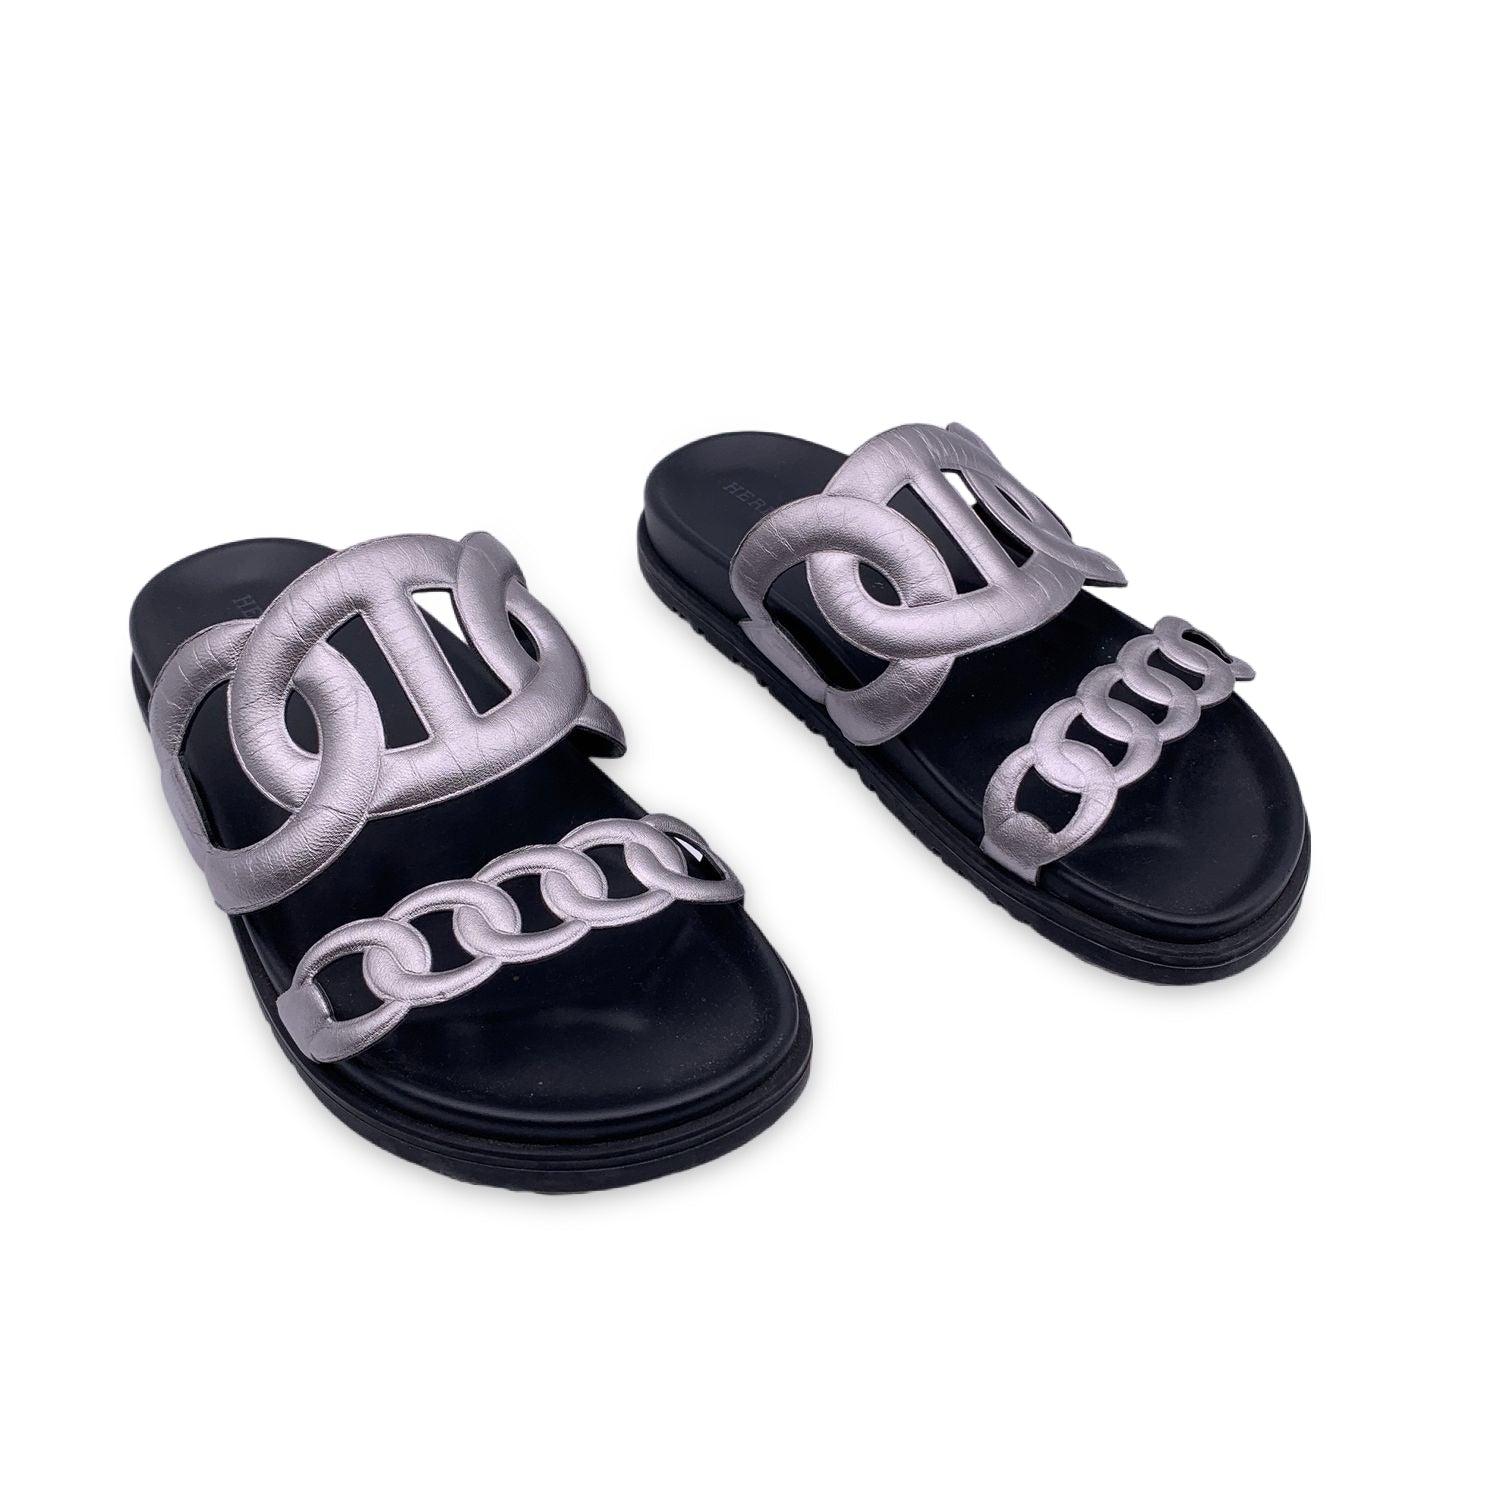 Hermès Extra slide sandals. Silver metal leather upper. Chaine d'Ancre inspired straps. Anatomical rubber sole. Size 37. Foot lenght: 9 inches - 23 cm. Retail price is 710 €

Details

MATERIAL: Leather

COLOR: Silver

MODEL: Extra

GENDER: